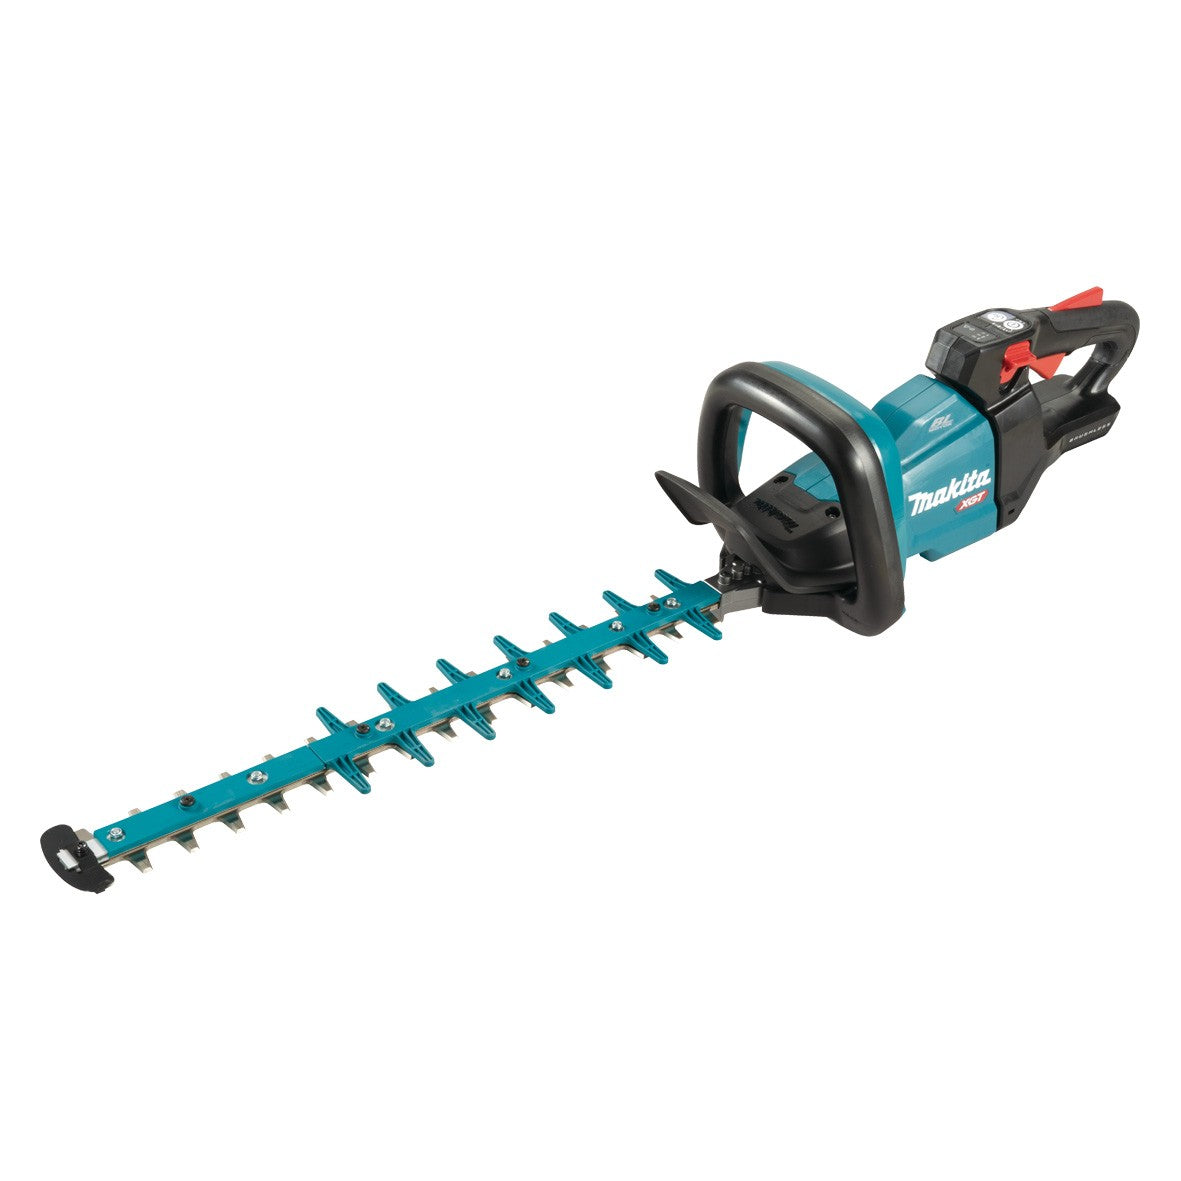 40V 600mm Brushless Hedge Trimmer Bare (Tool Only) UH008GZ by Makita